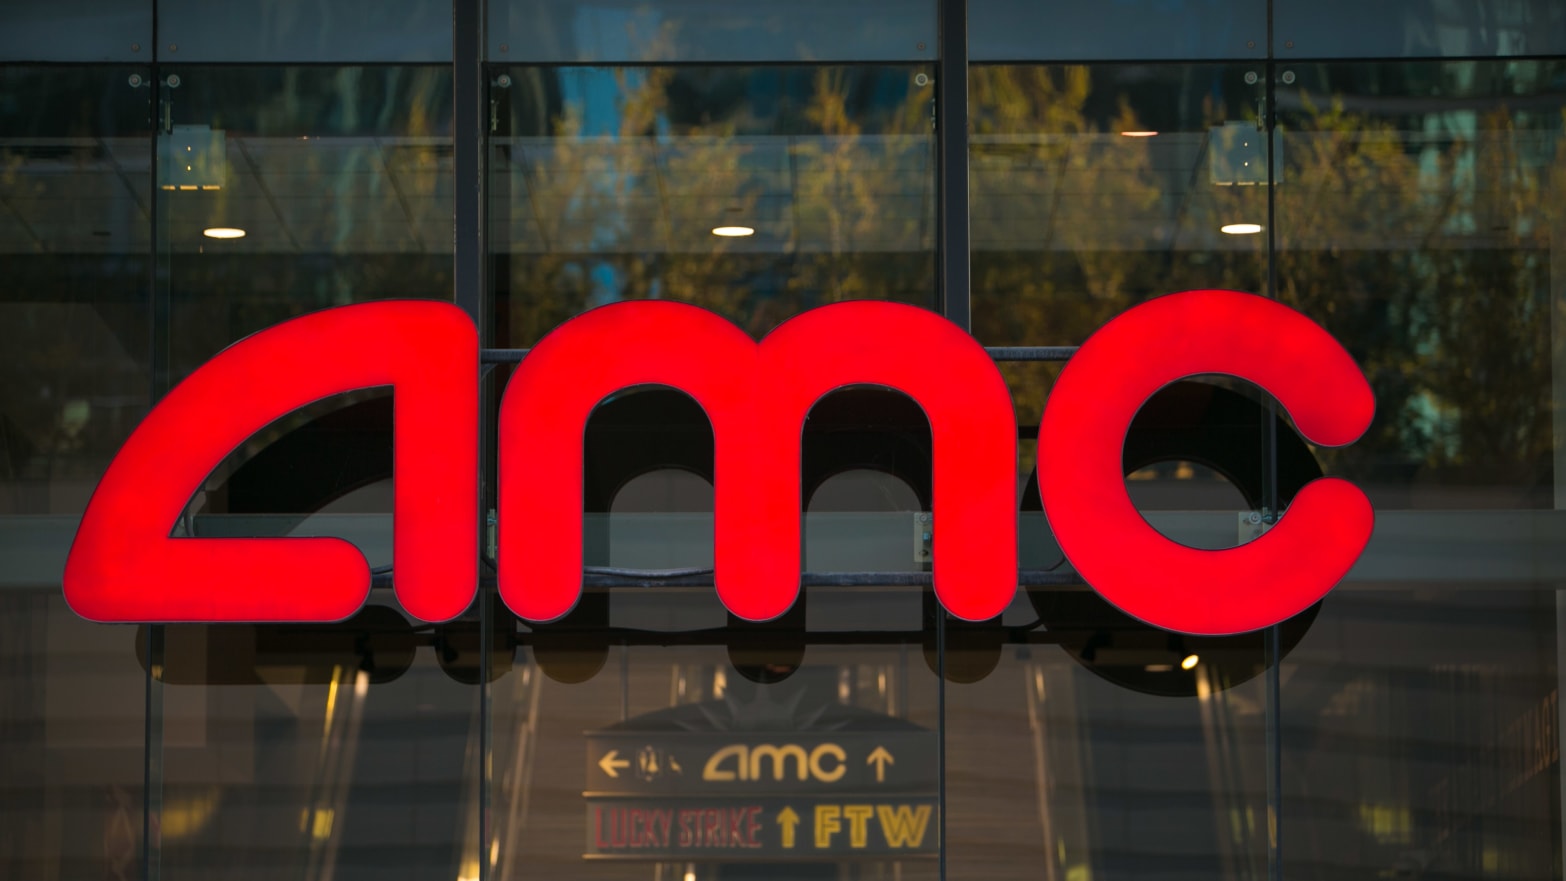 The AMC theater near Columbus Avenue is viewed on October 10, 2015 in Chicago, Illinois